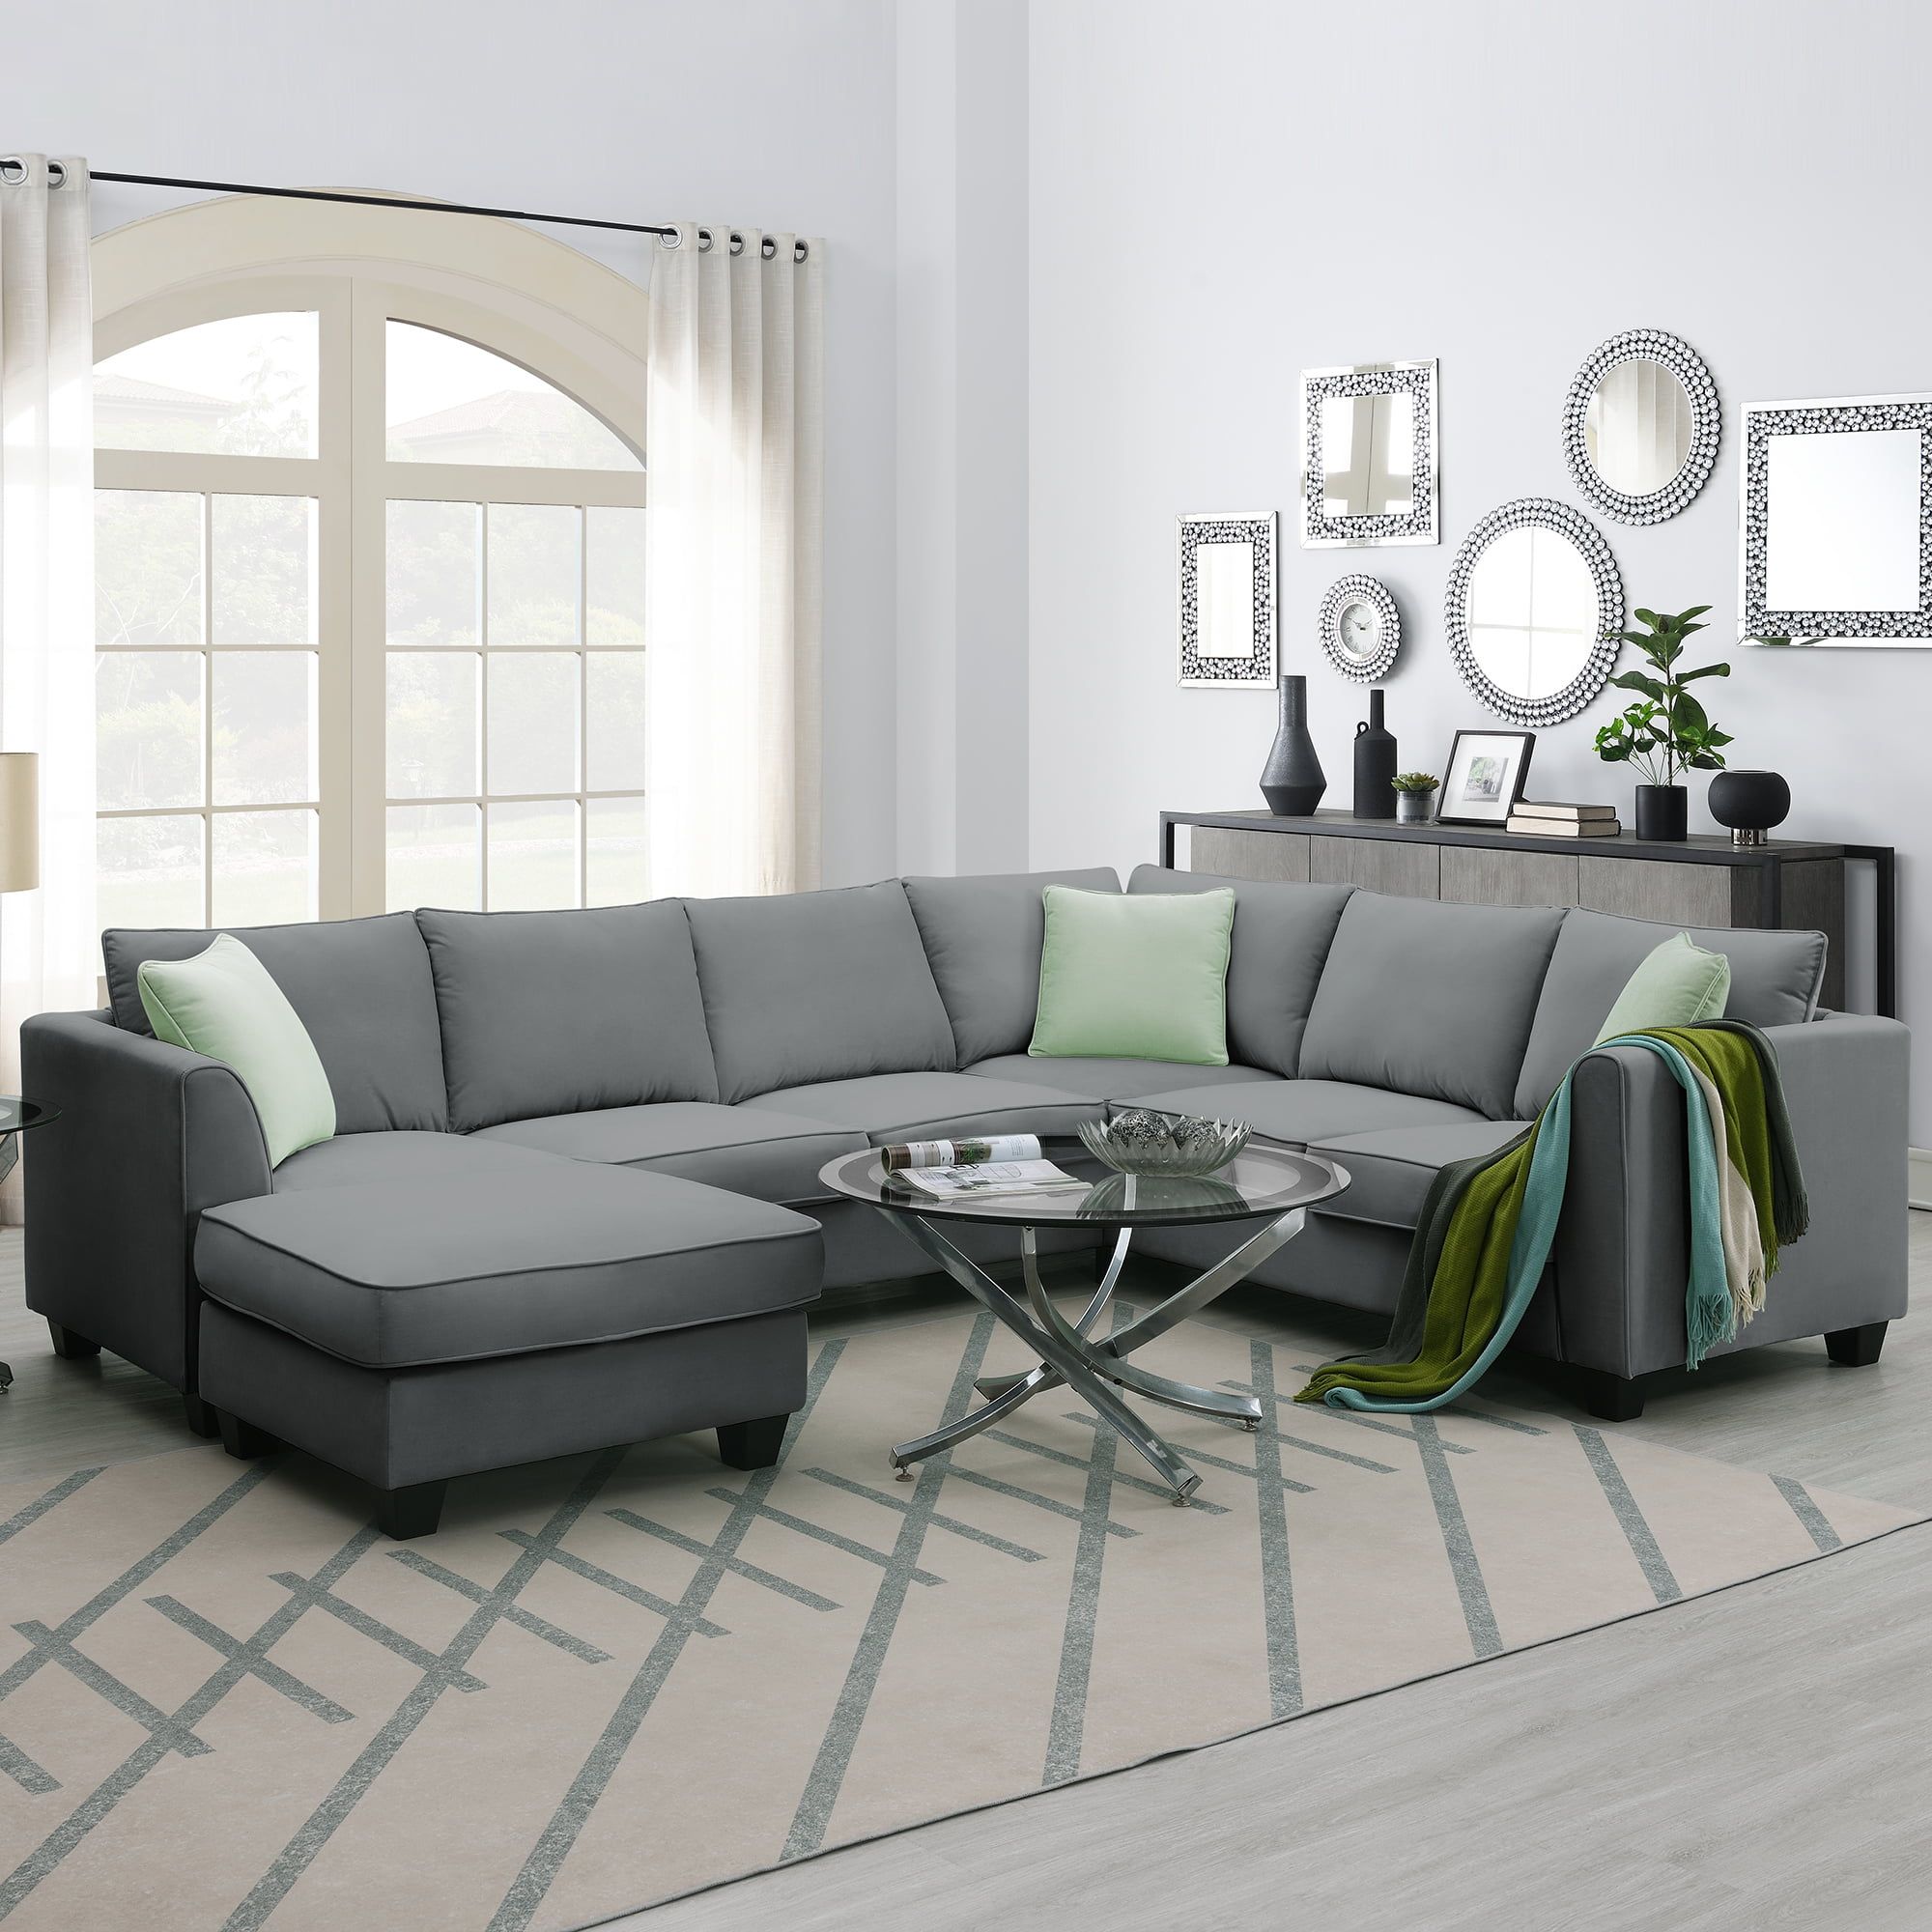 L Shaped Modular Sectional Couch, Kamida 7 Seater Sectional Couch With  Ottoman And 3 Pillows, Modern L Shaped Fabric Upholstered Couch Furniture,  Heavy Duty Sectional Couch For Living Room, Gray – Walmart Intended For 7 Seater Sectional Couch With Ottoman And 3 Pillows (Gallery 1 of 20)